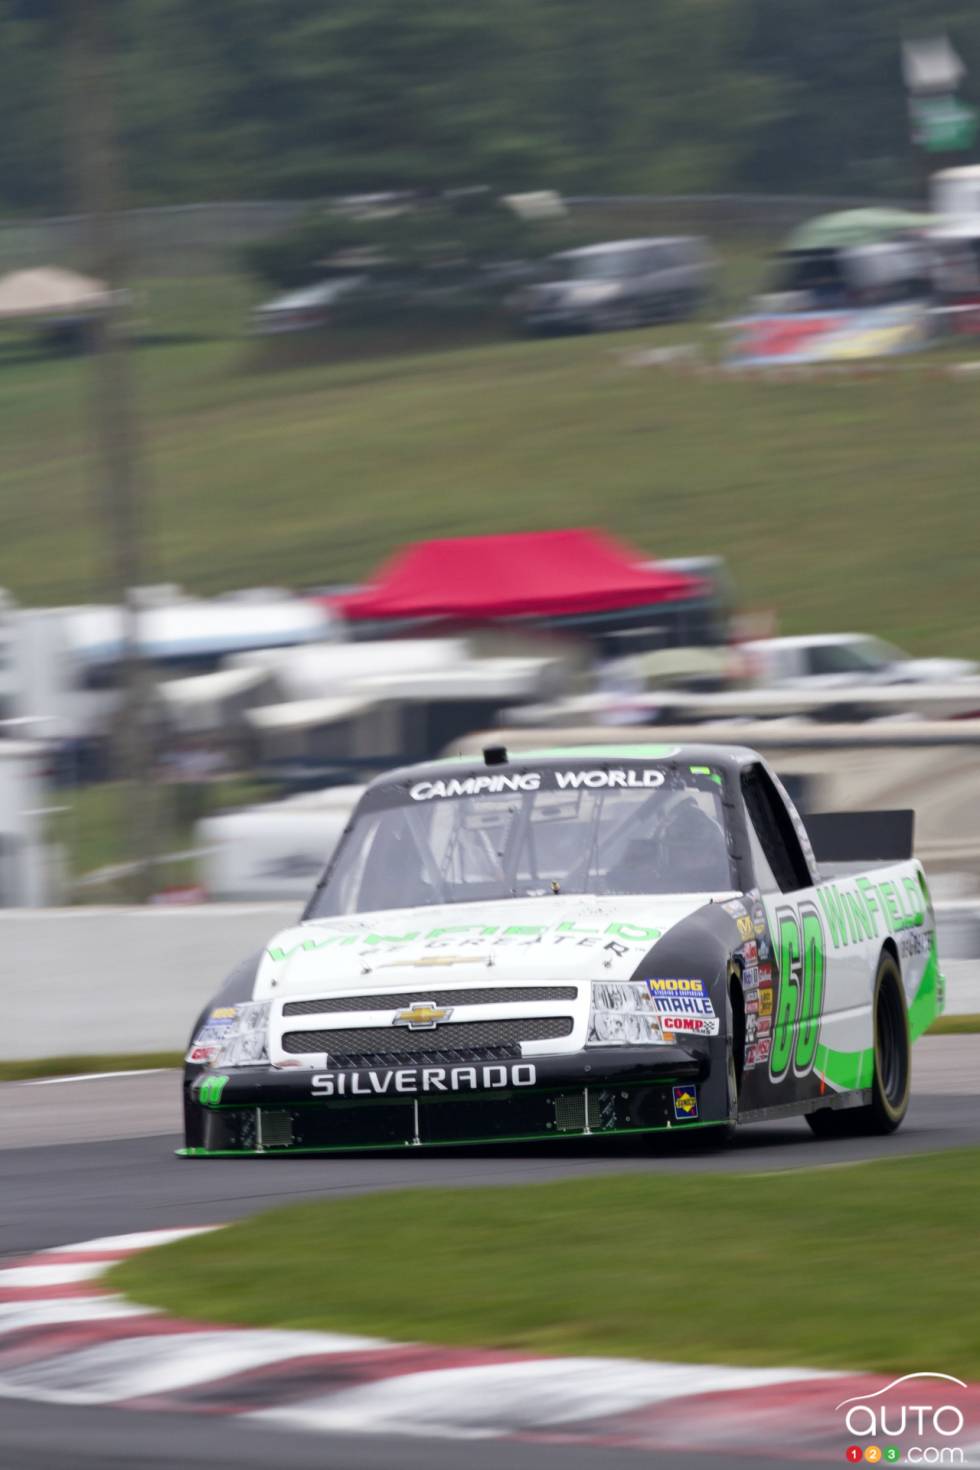 Dakoda Armstrong, Chevrolet Winfield, in action during practice on saturday